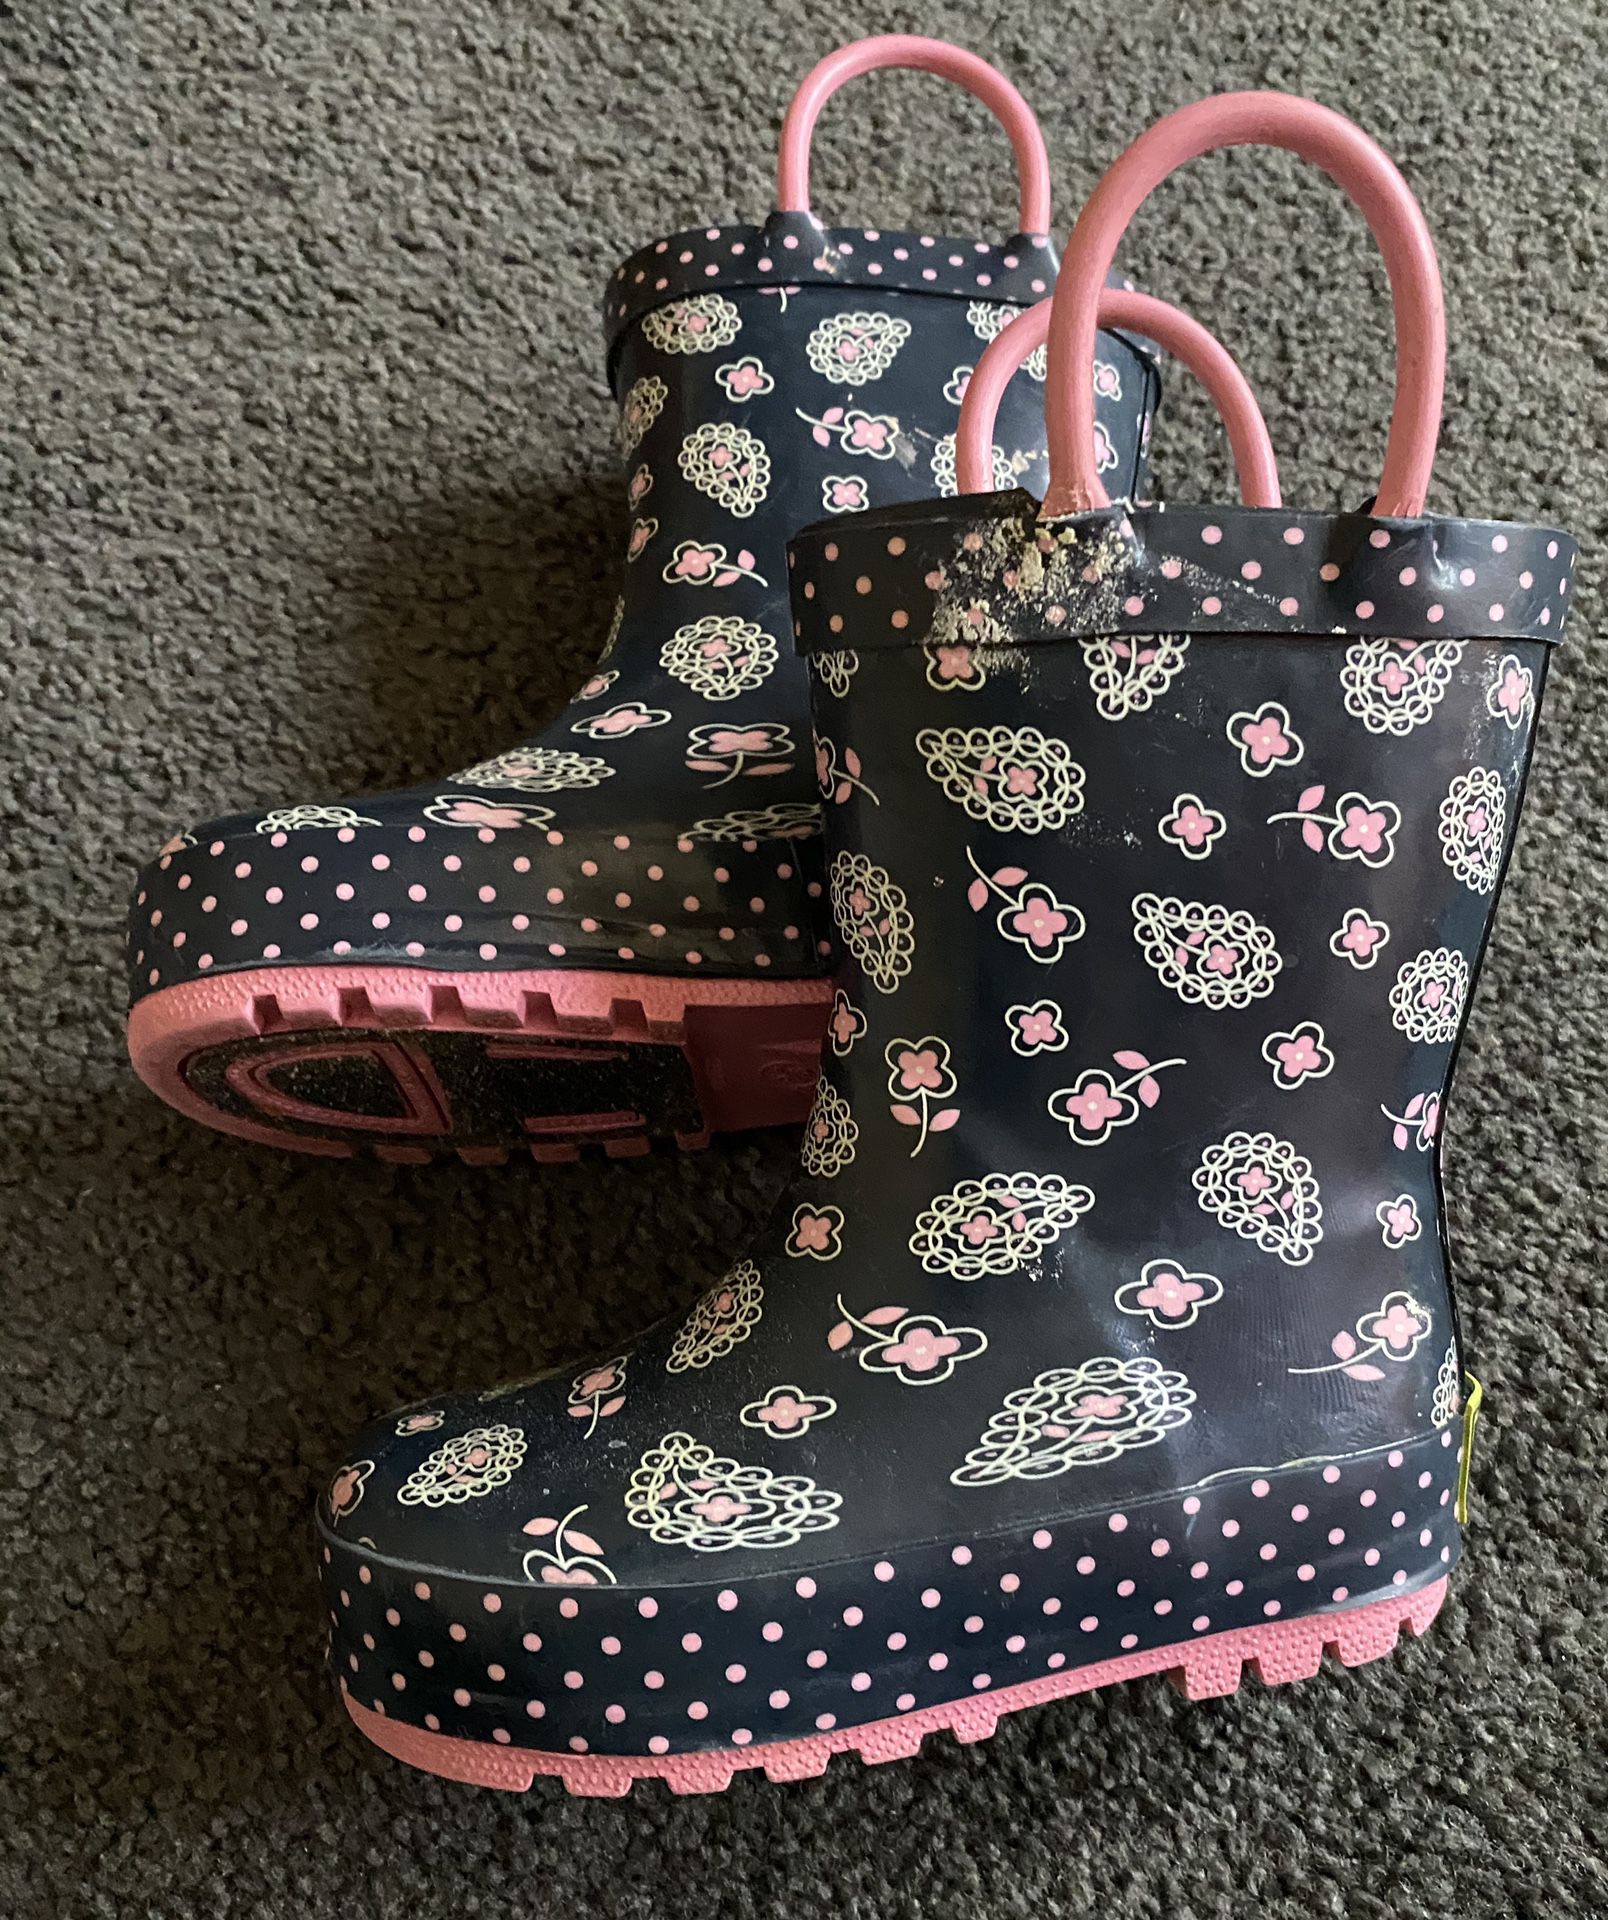 Western Chief toddler girl’s rain boots size 5/6